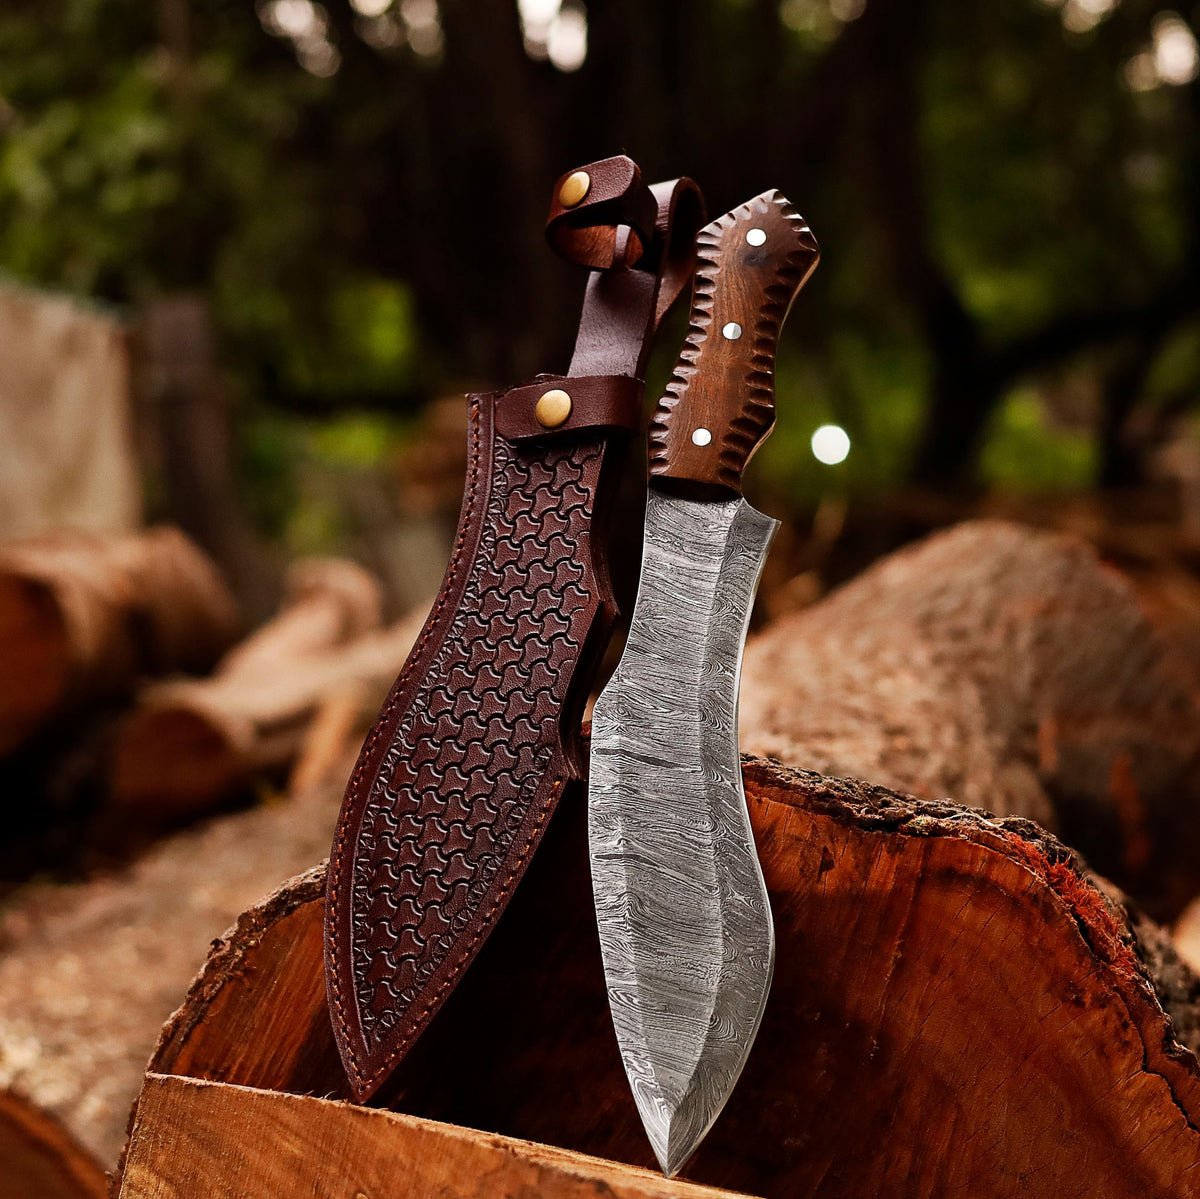 Blade Smith - The remarkable kukri blade